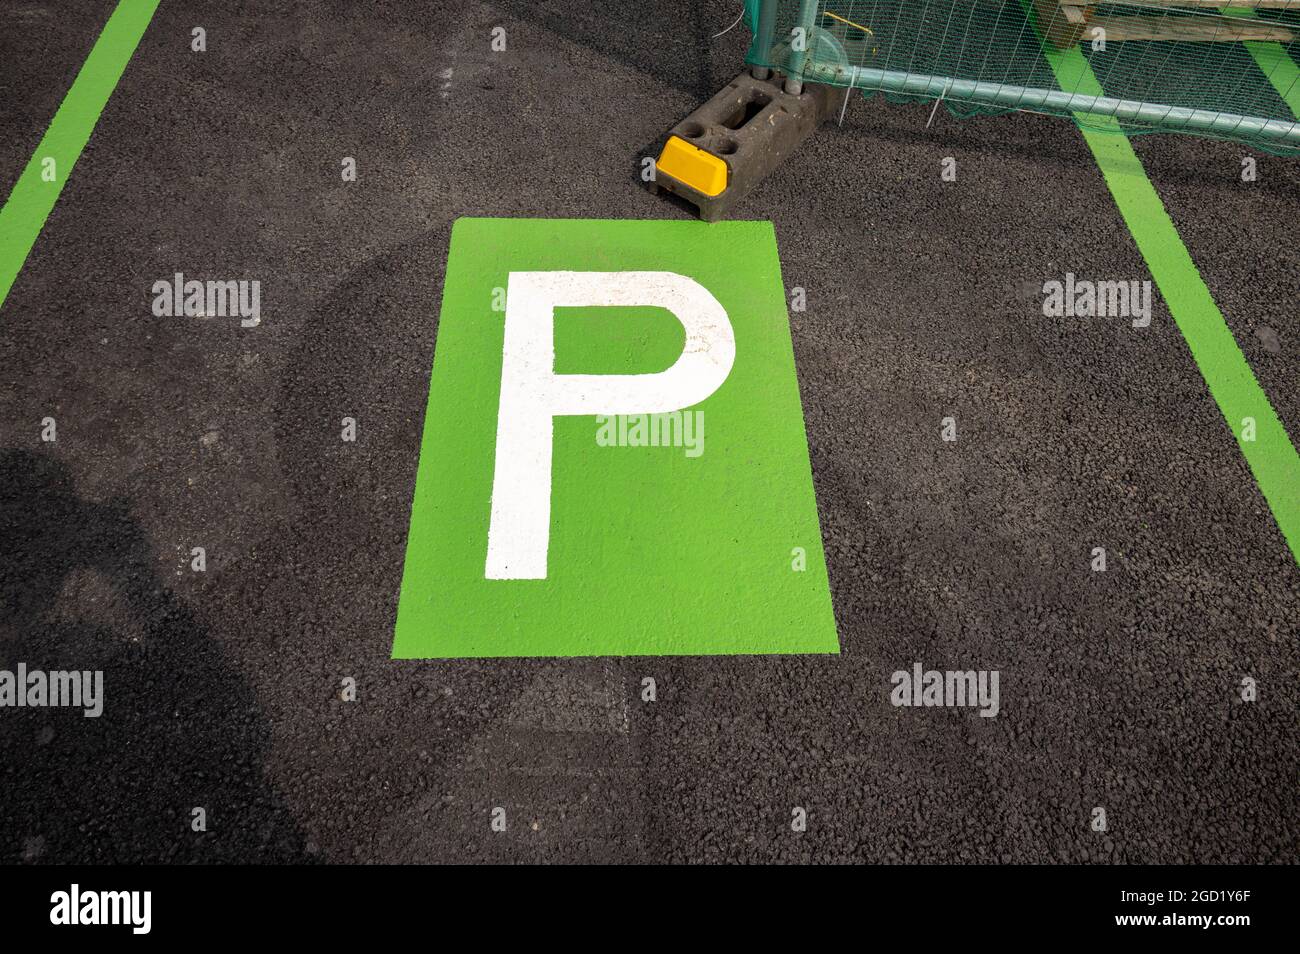 New Lidl store on Poppy Road with a electric charging station point marking on ground Stock Photo